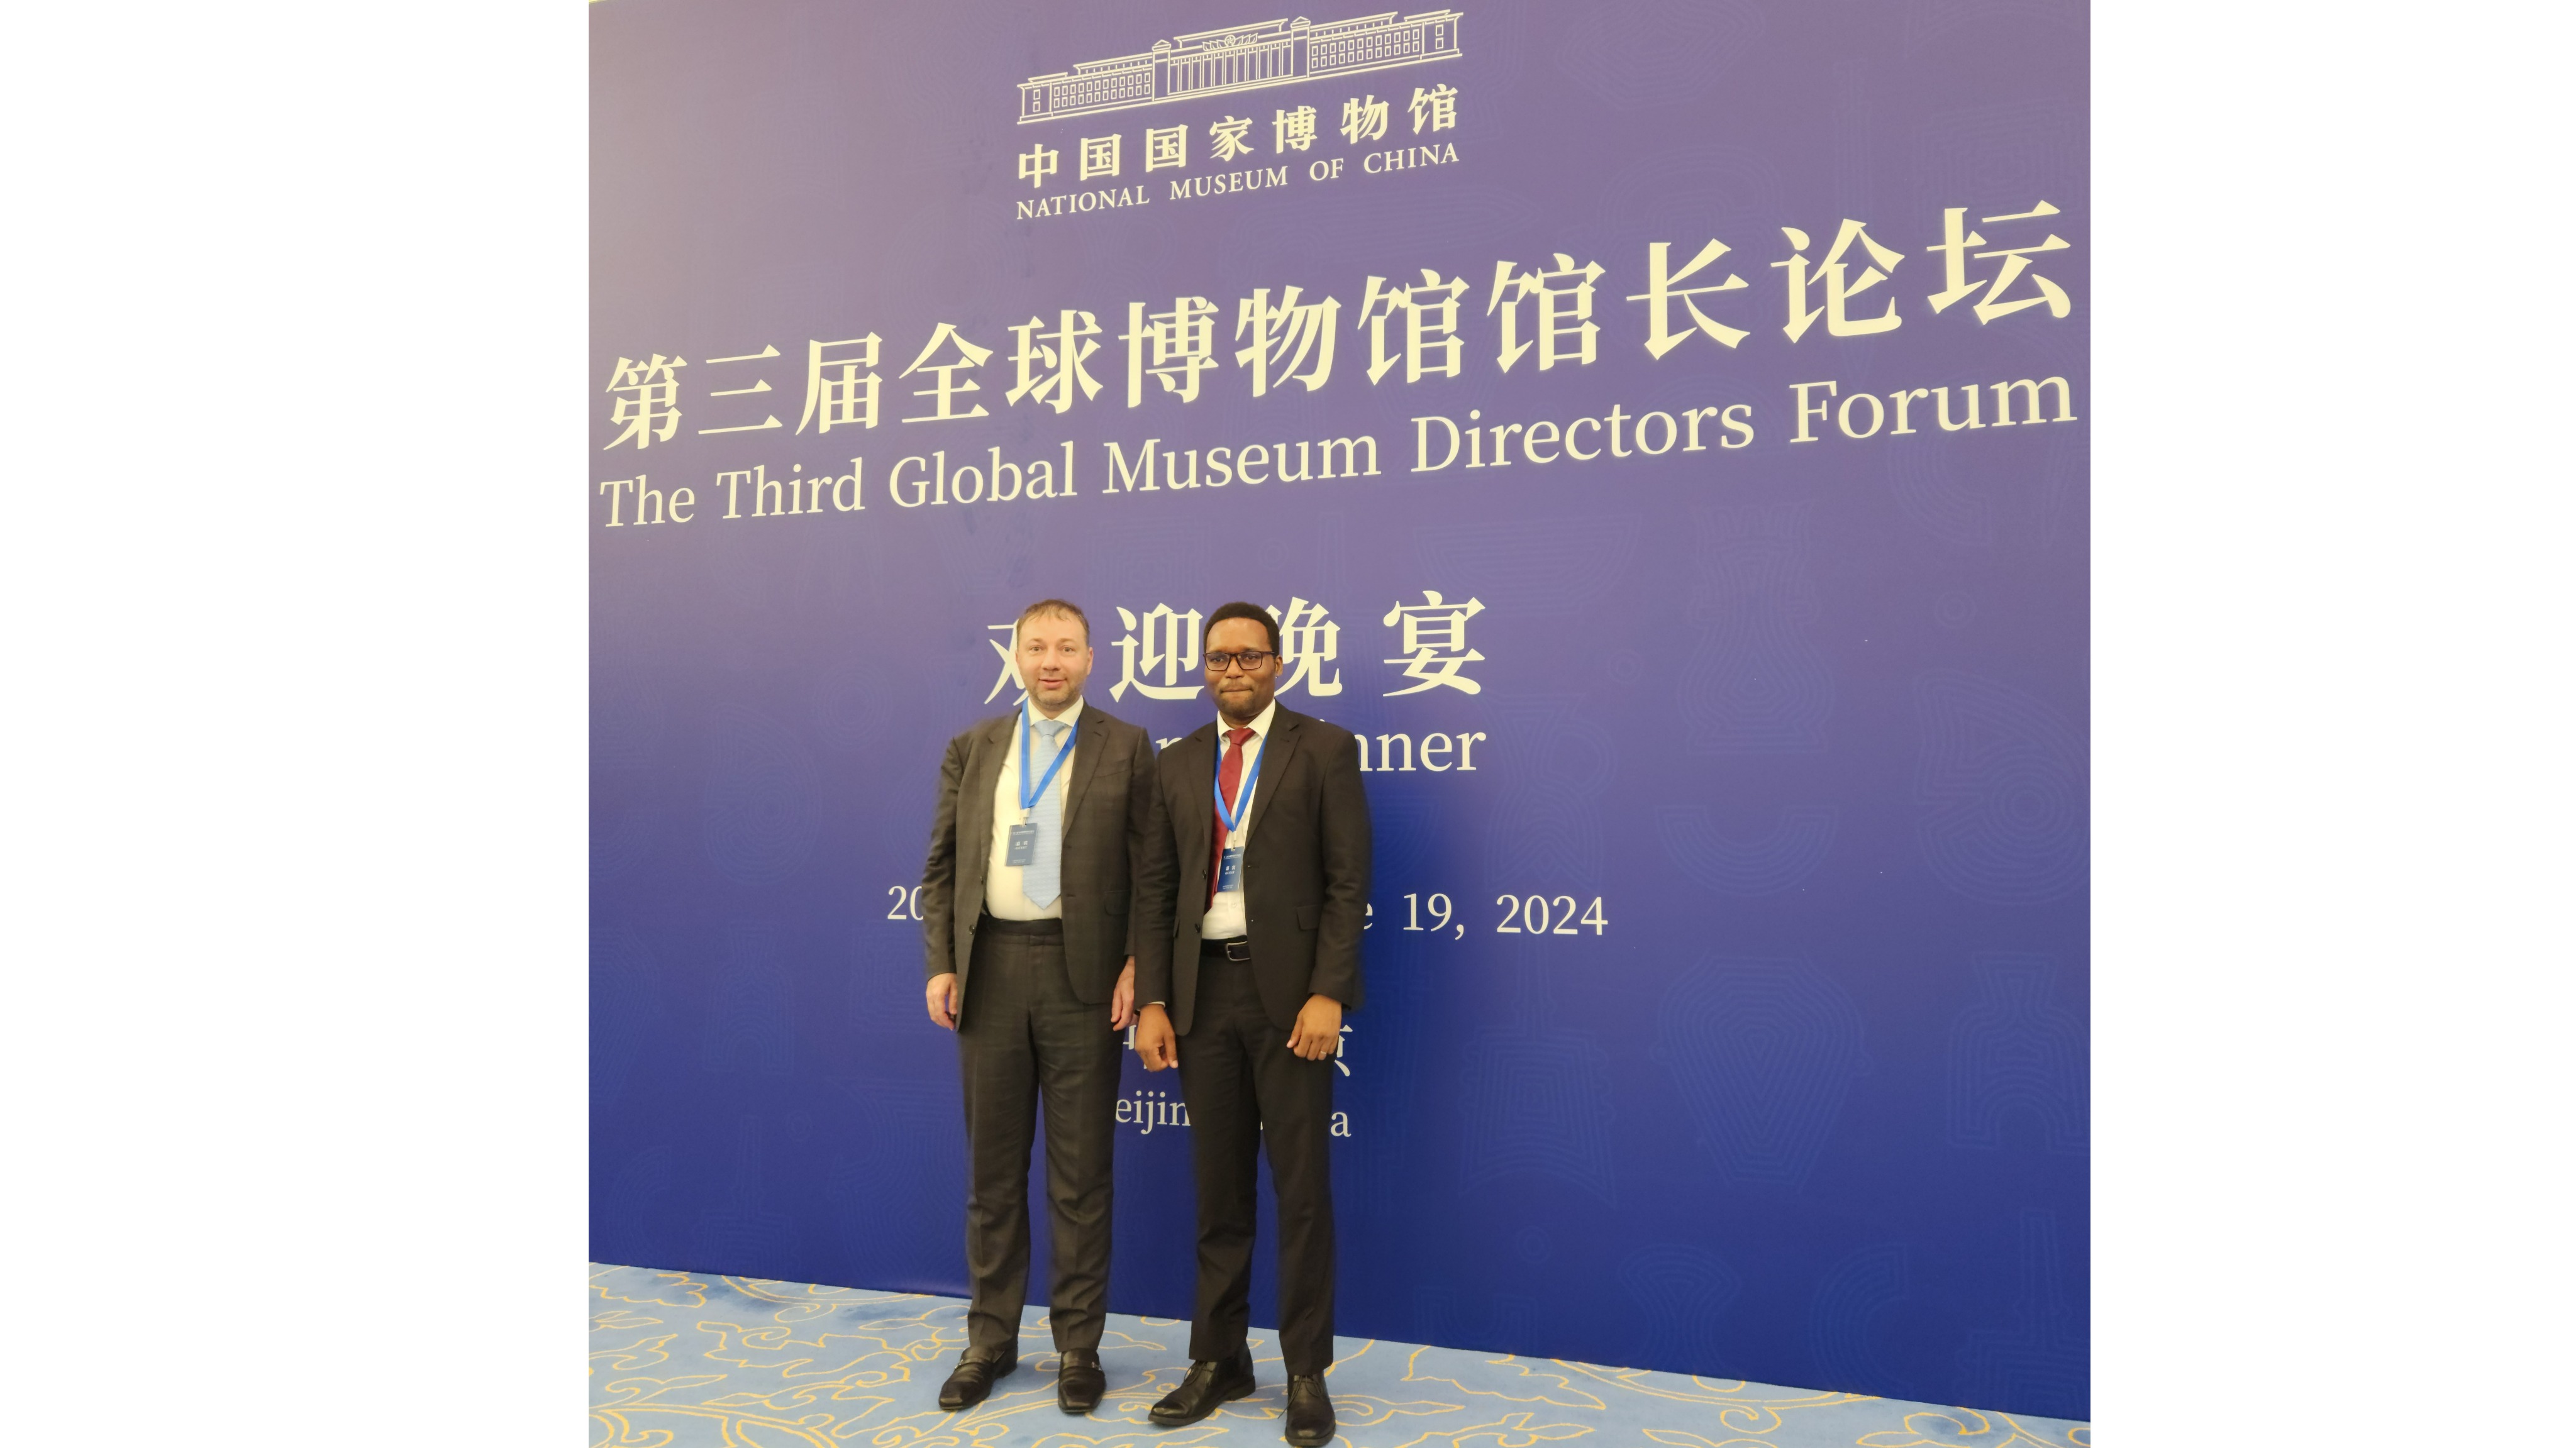 NMT DIRECTOR GENERAL ATTENDS THE THIRD GLOBAL MUSEUM DIRECTORS FORUM IN CHINA